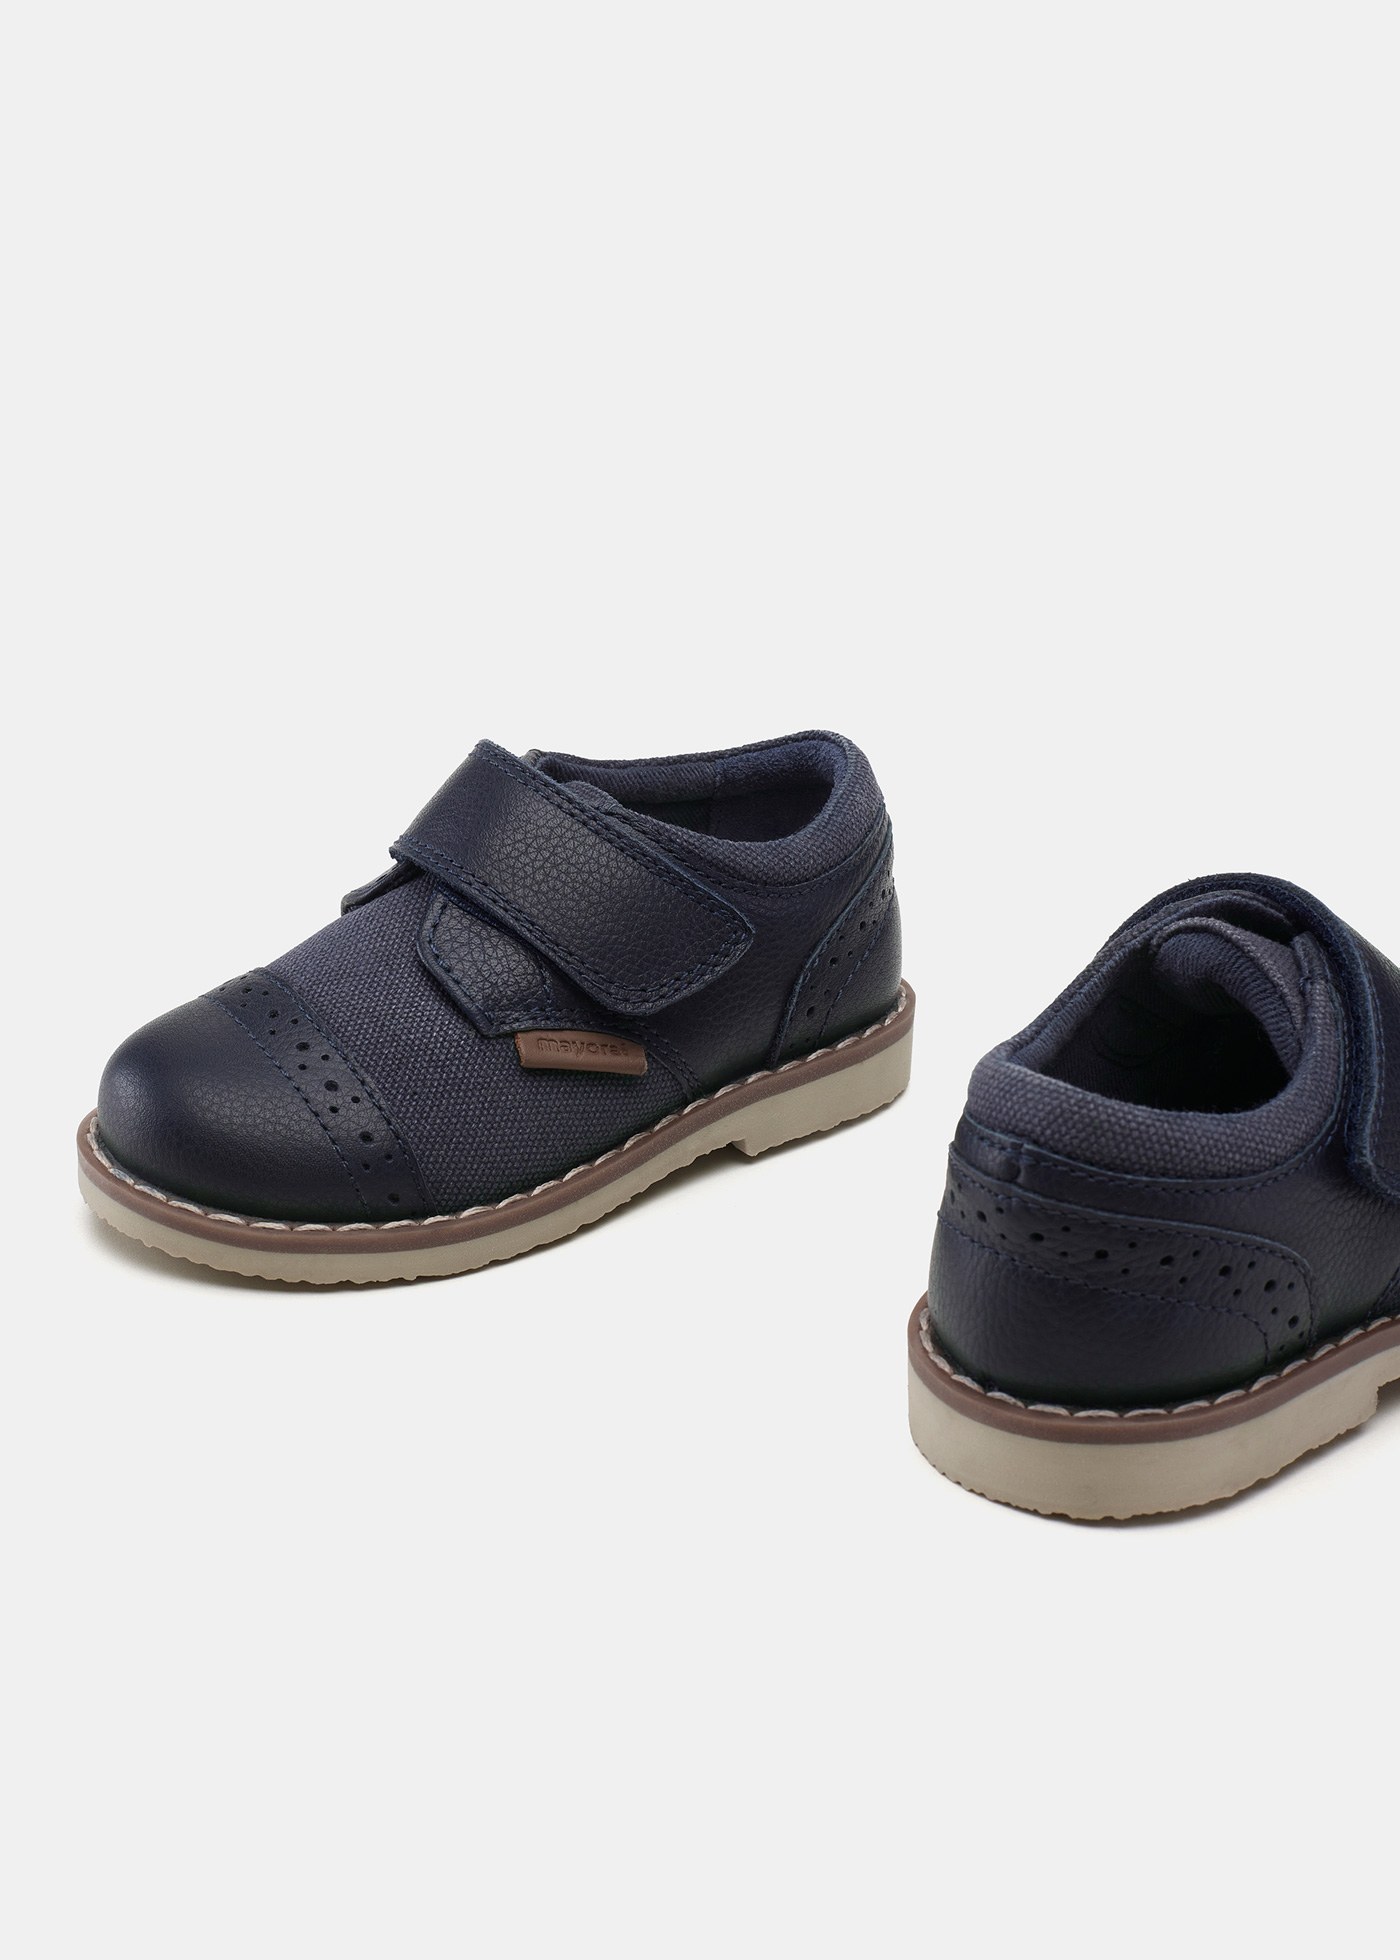 Baby leather oxford